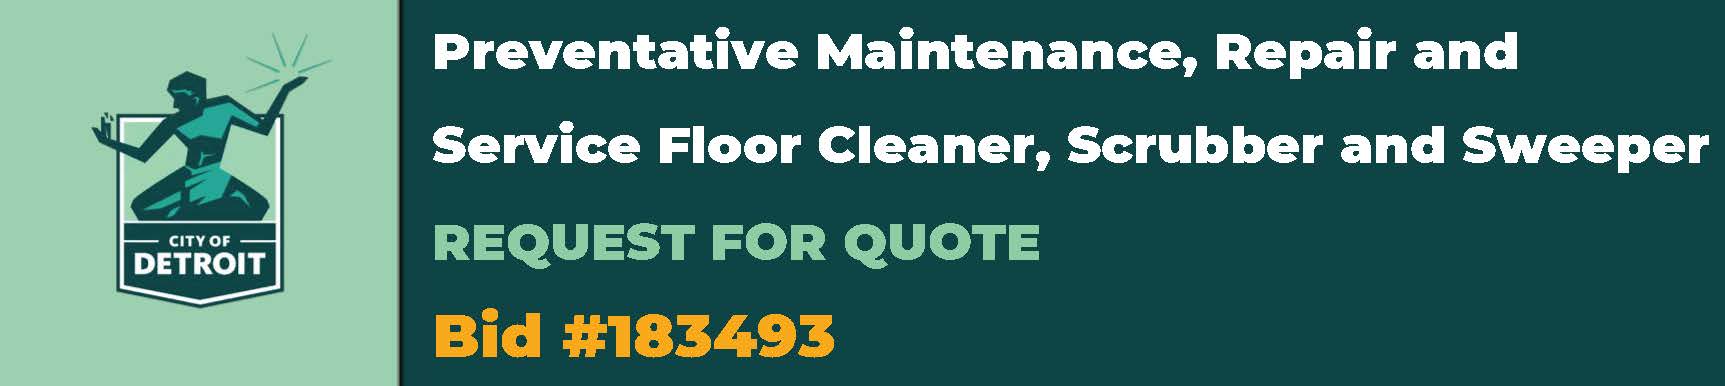 Preventative Maintenance, Repair and Service Floor Cleaner, Scrubber and Sweeper